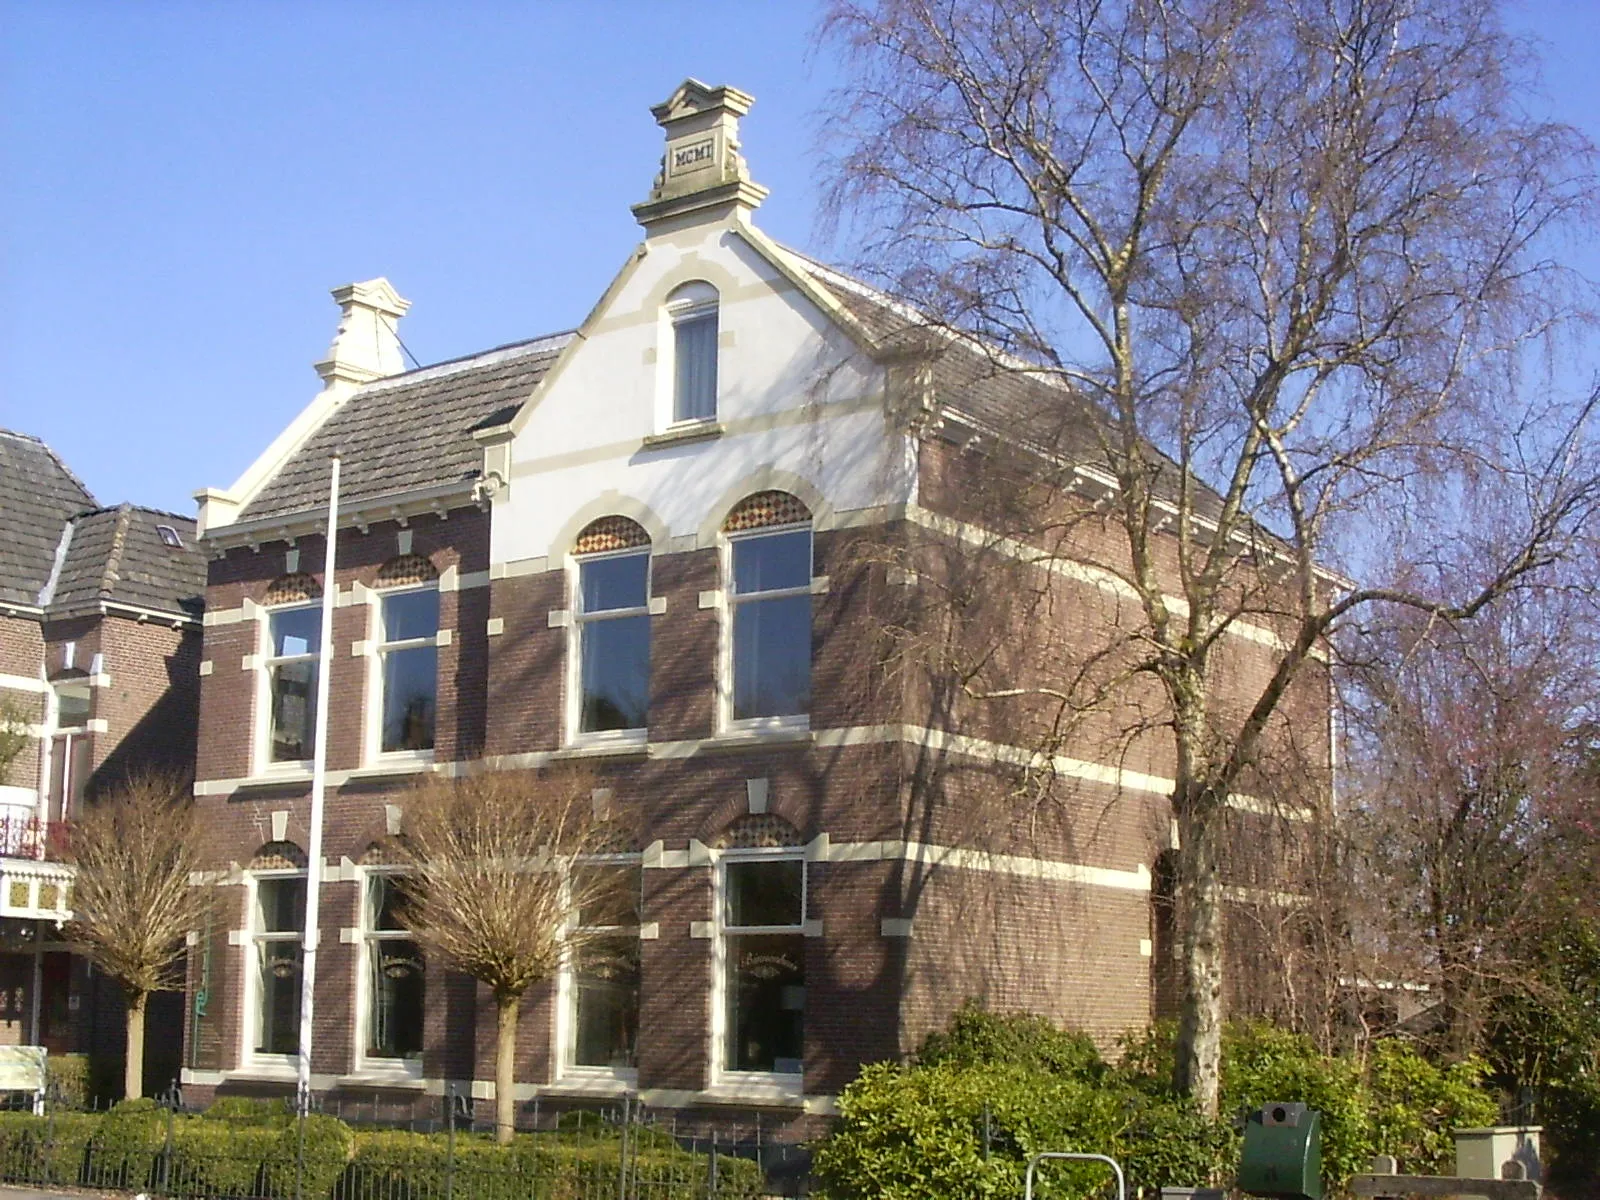 Photo showing: This is an image of a municipal monument in Steenwijkerland with number